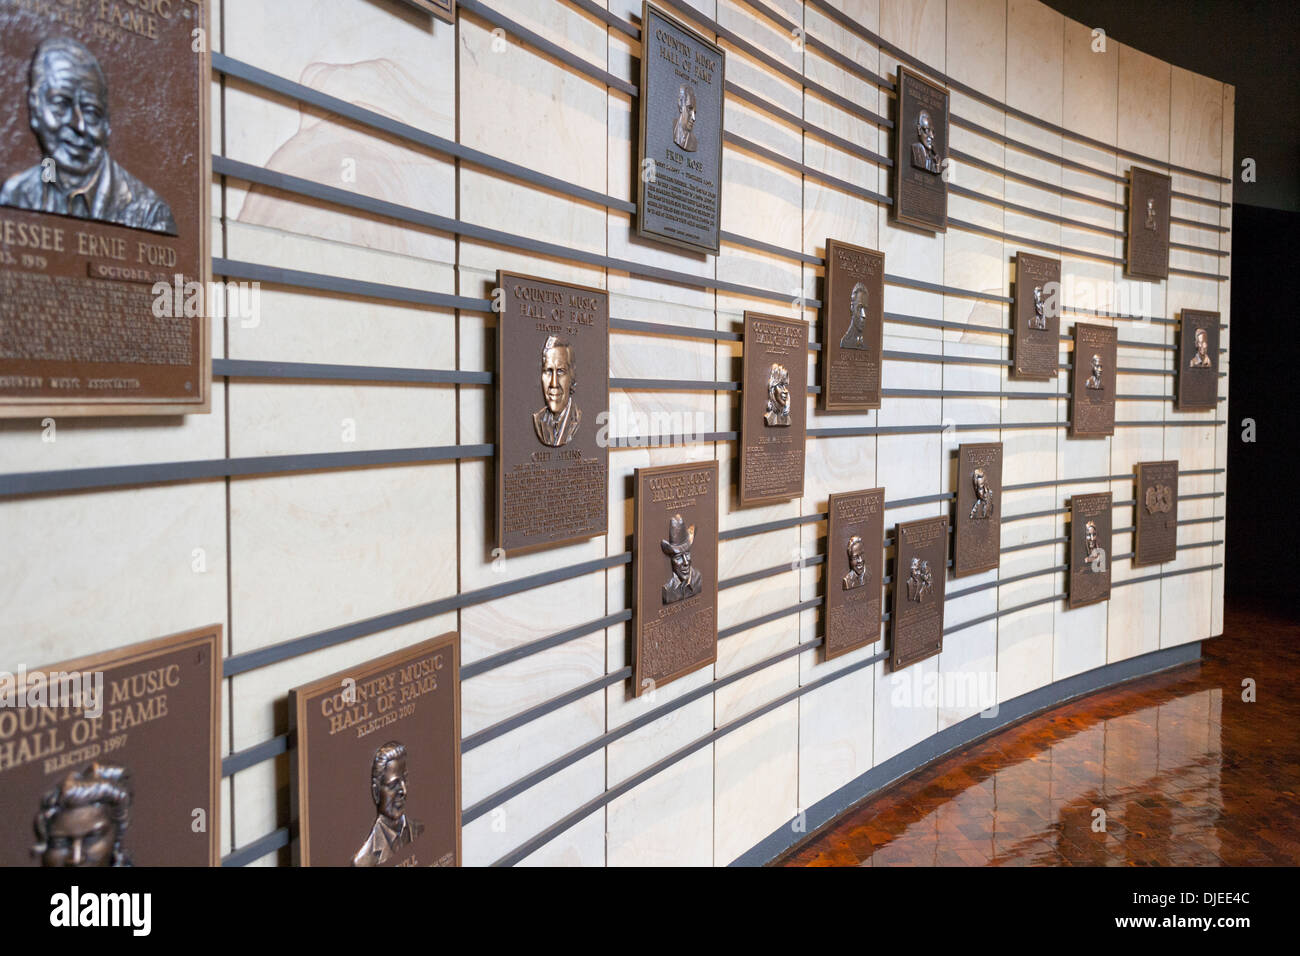 Many plaques recognizing stars in the country music profession at the Country Music Hall of Fame in Nashville, TN, USA Stock Photo